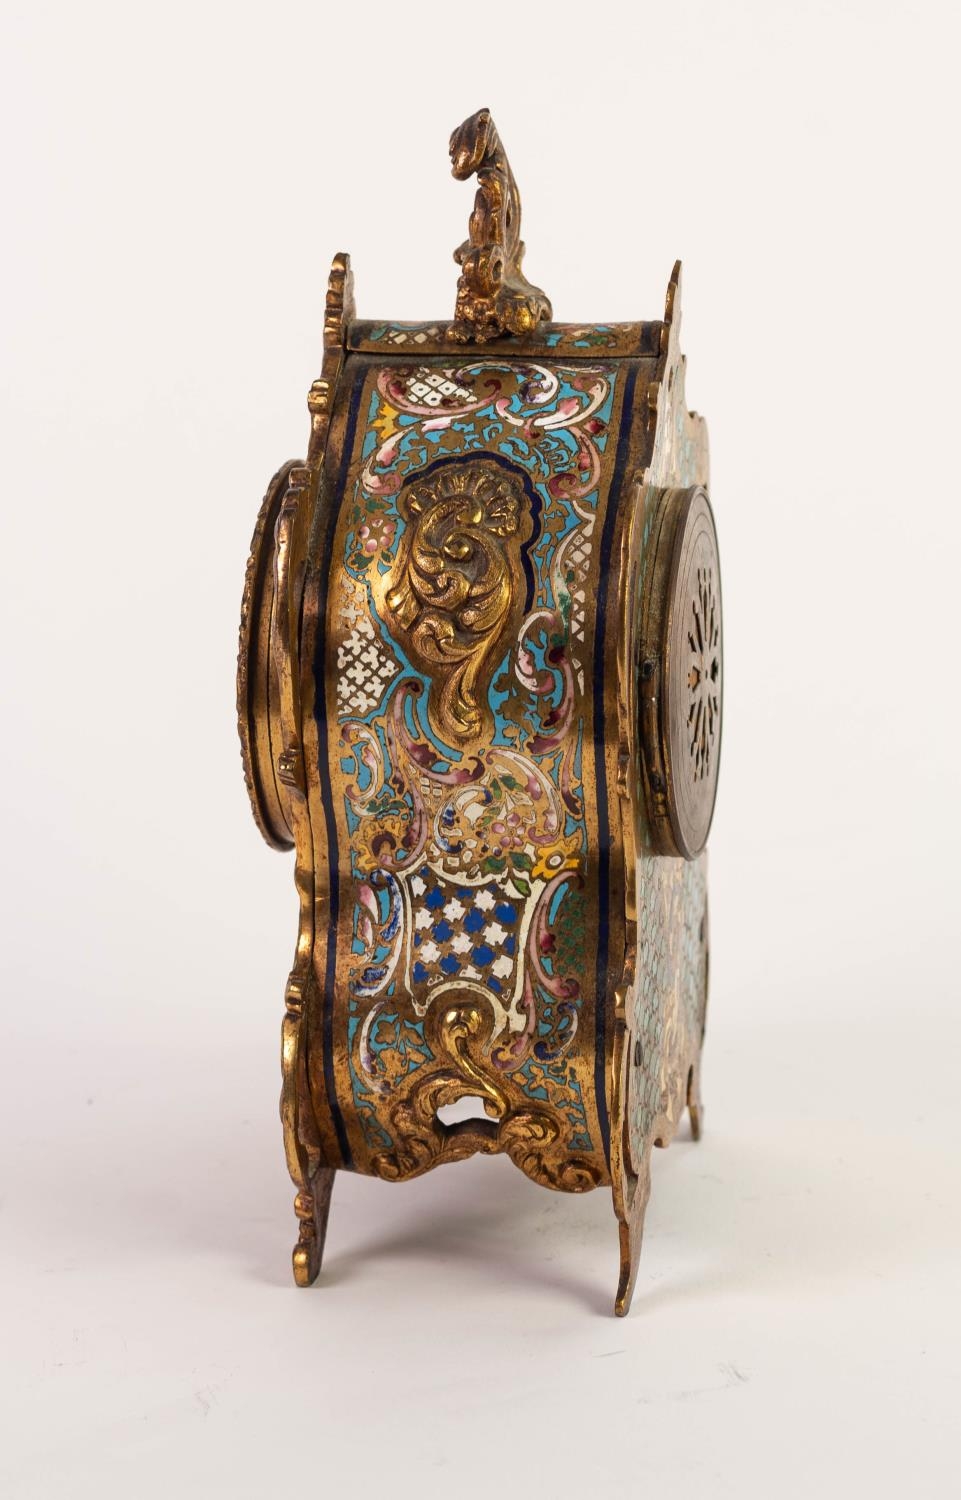 CIRCA 1900 FRENCH GILT METAL AND CHAMPLEVE ENAMEL ROCOCO REVIVAL CASED MANTEL CLOCK, the movement by - Image 6 of 8